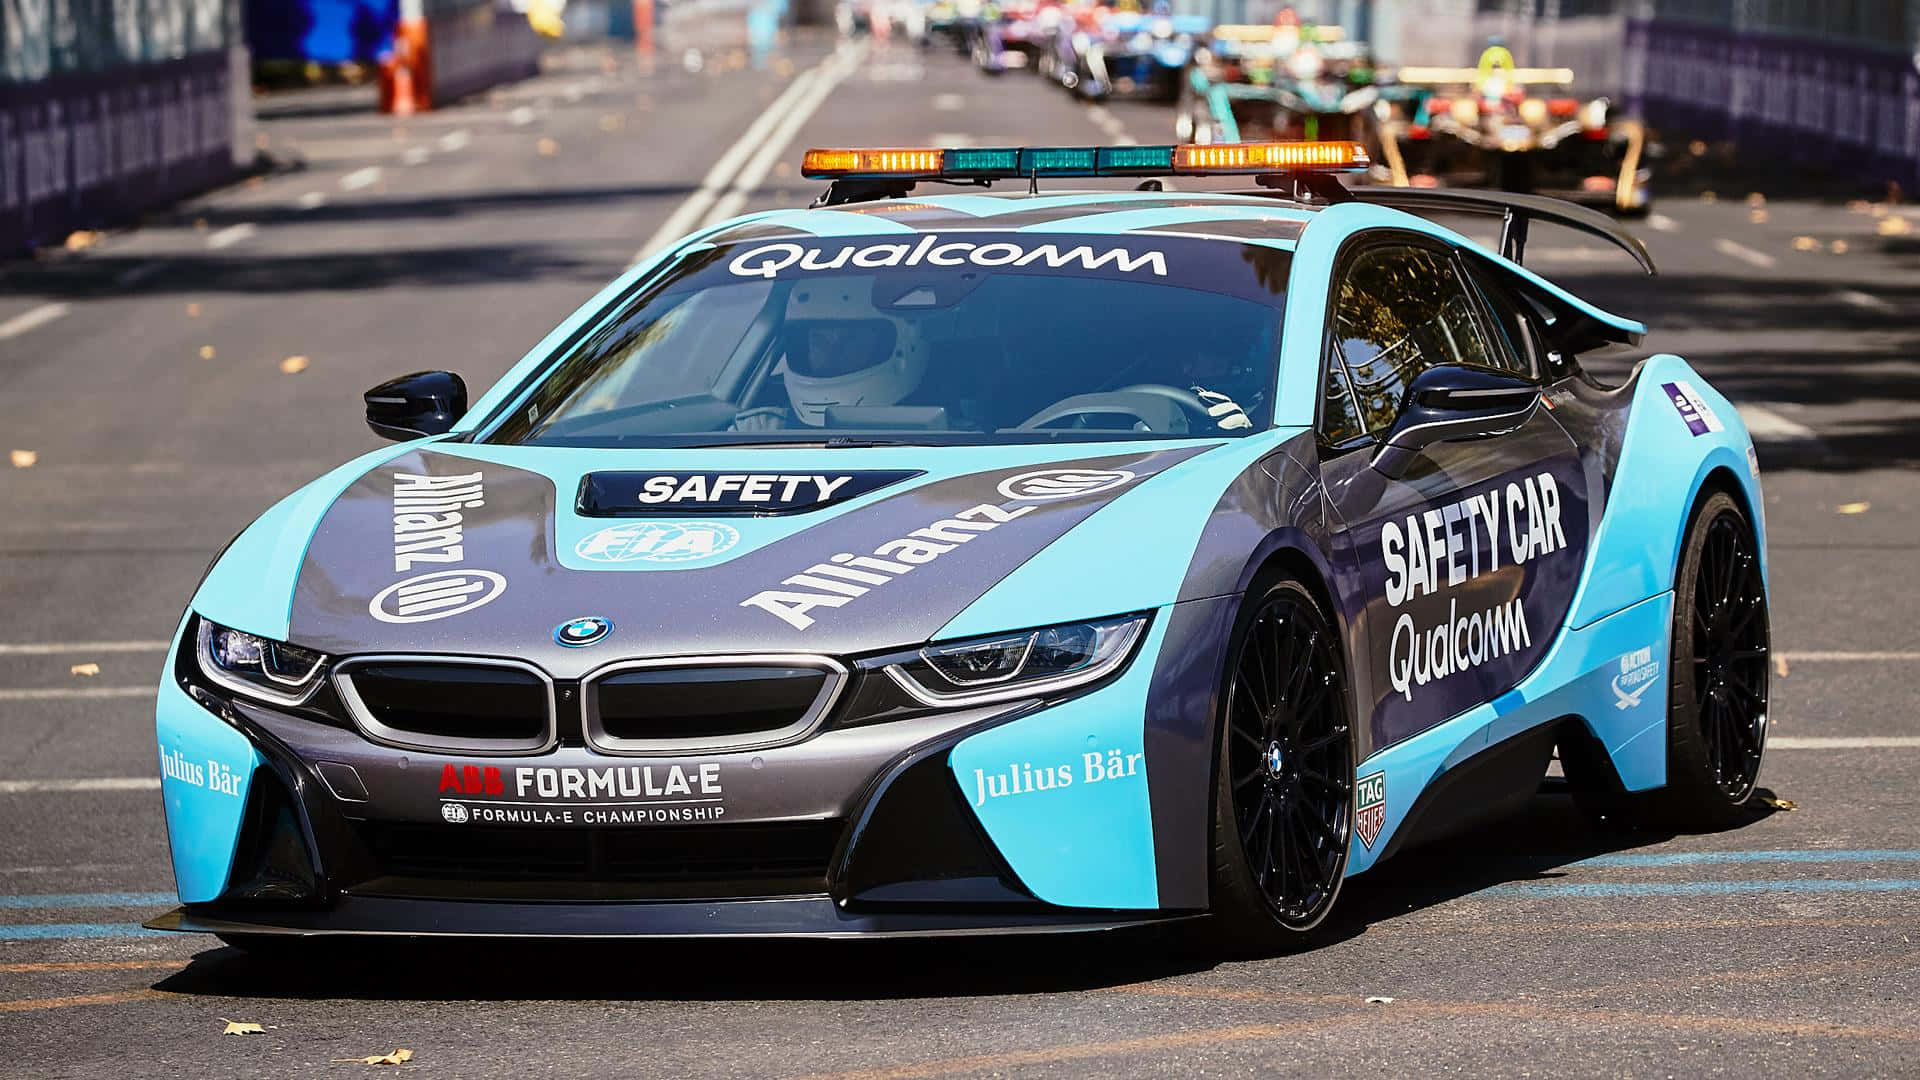 Racing Safety Car in Action Wallpaper